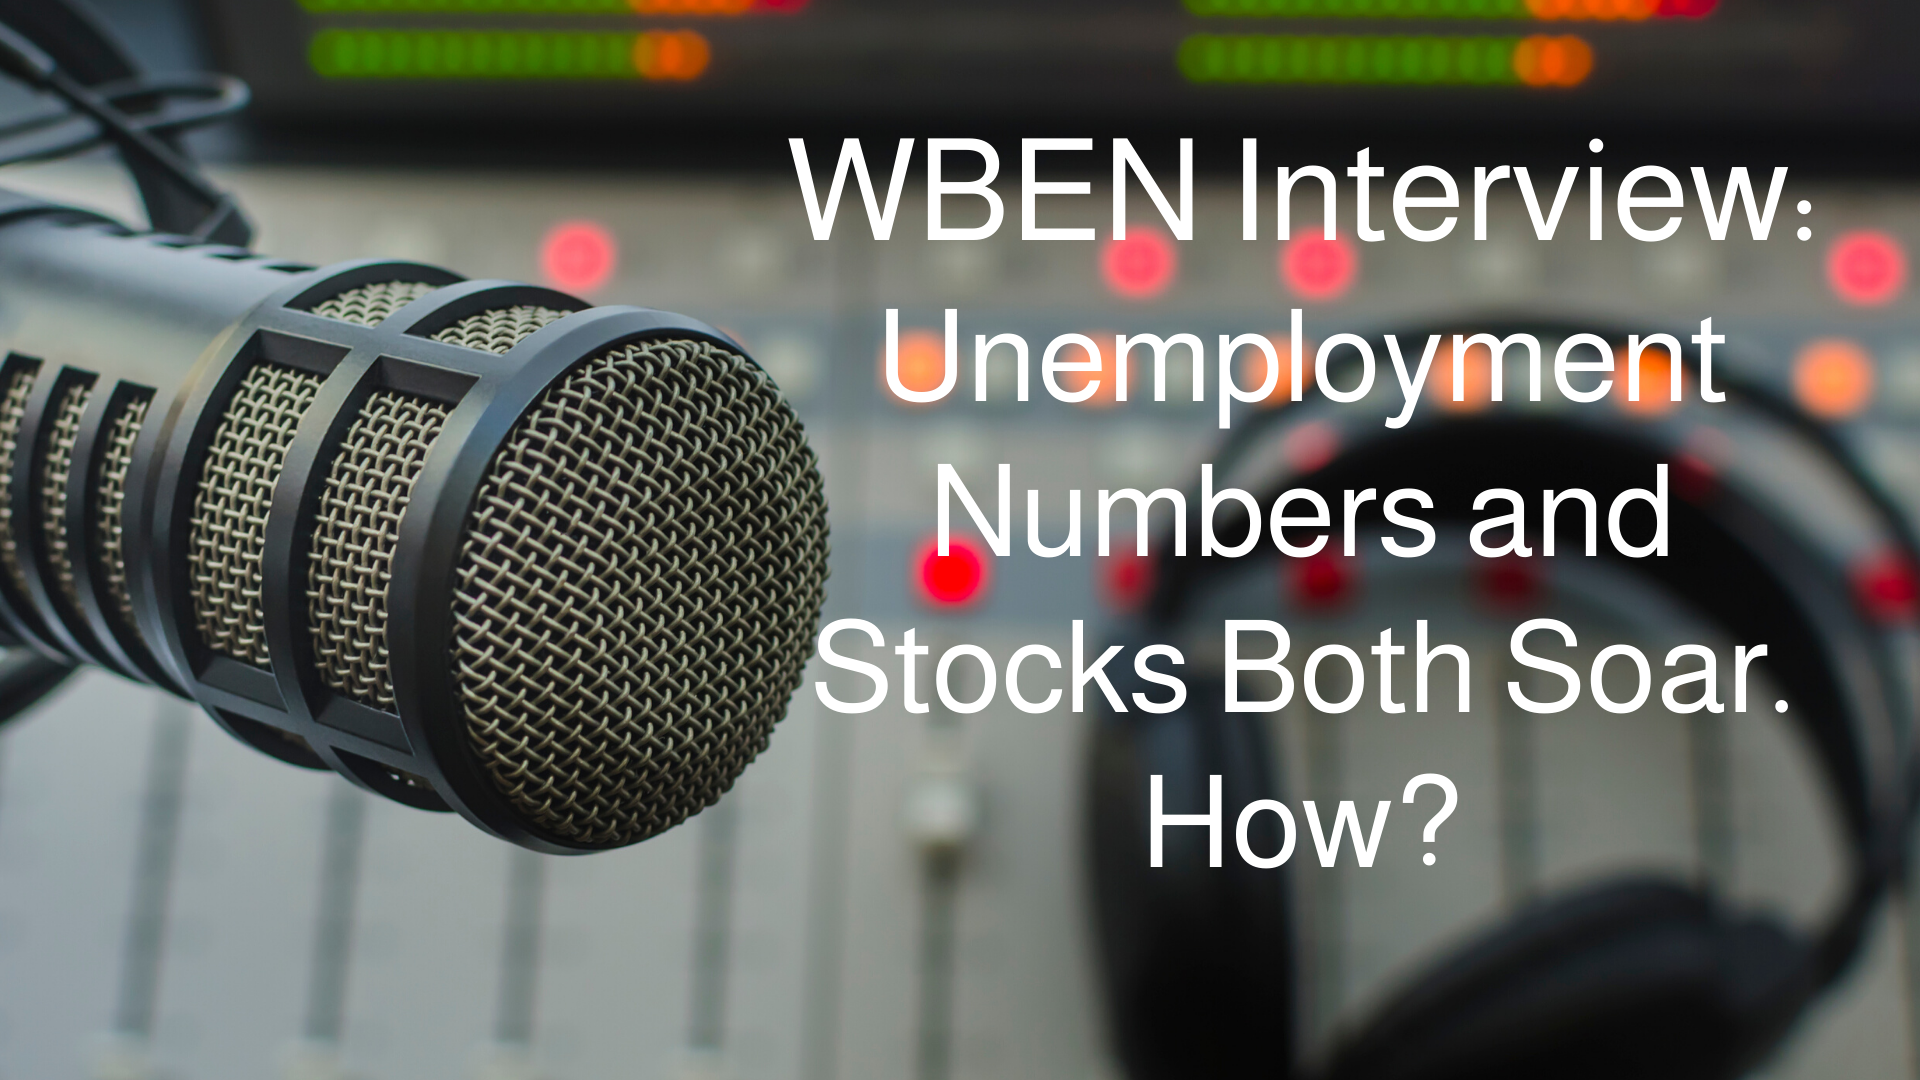 WBEN Interview: Unemployment Numbers and Stocks Both Soar. How?